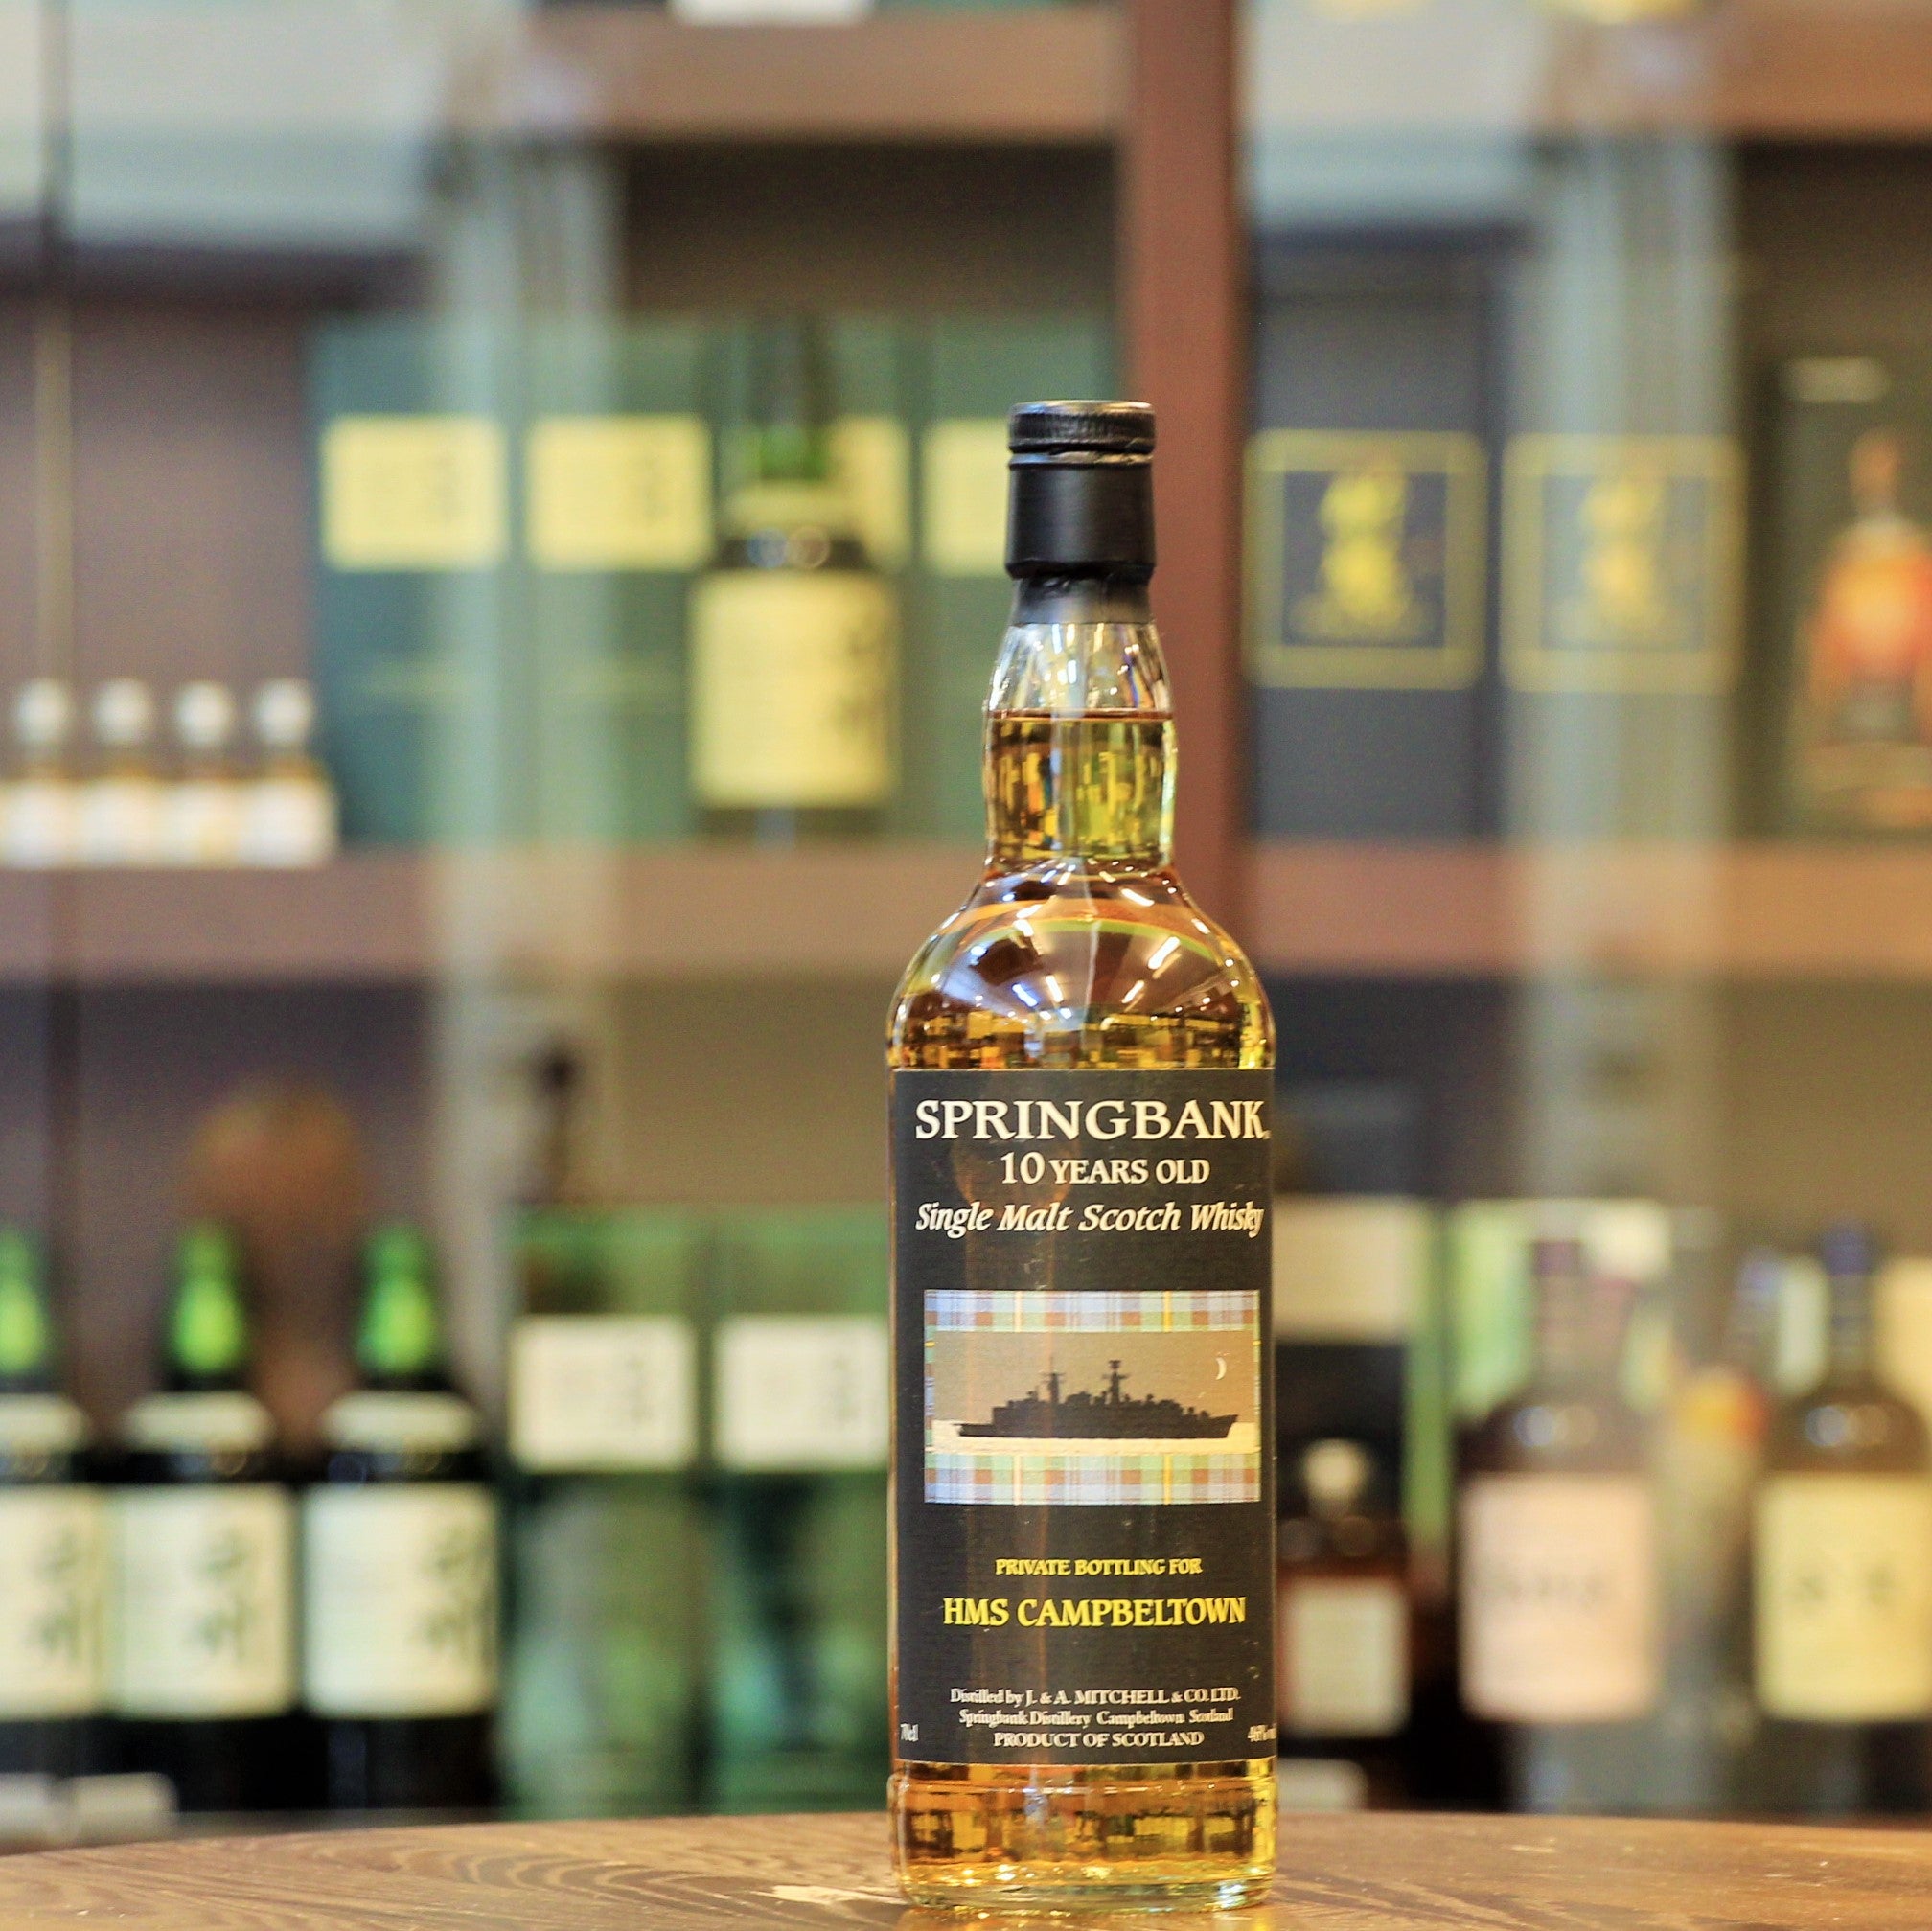 Springbank 10 Years Old Private Bottling for HMS Campbeltown Single Malt Scotch Whisky